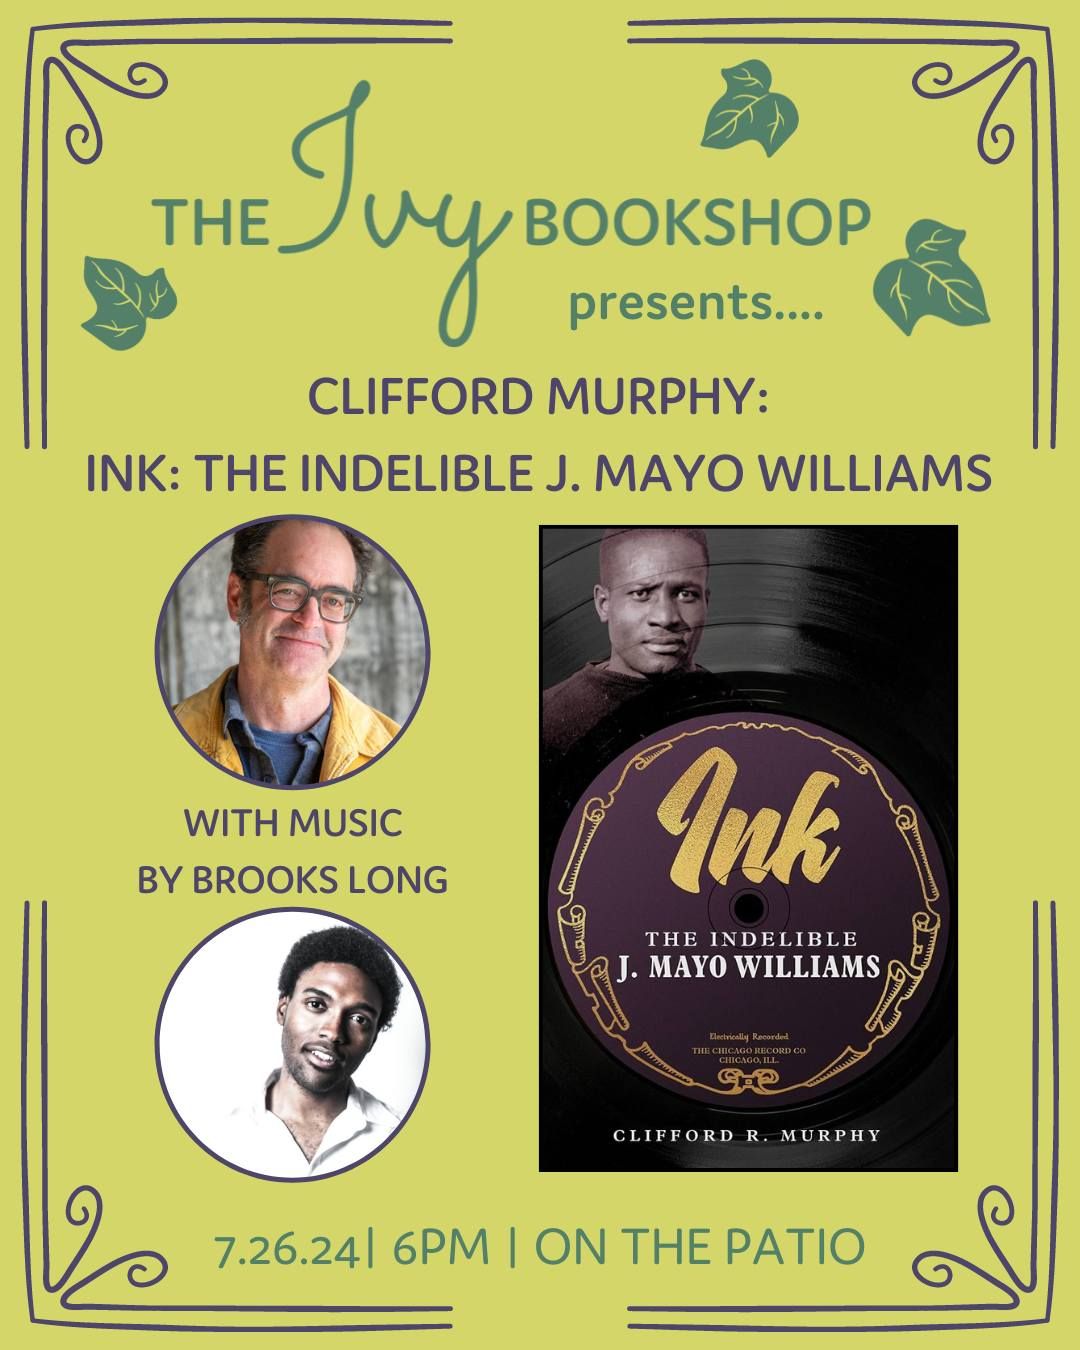 Clifford Murphy: INK: THE INDELIBLE J. MAYO WILLIAMS (With Brooks Long)